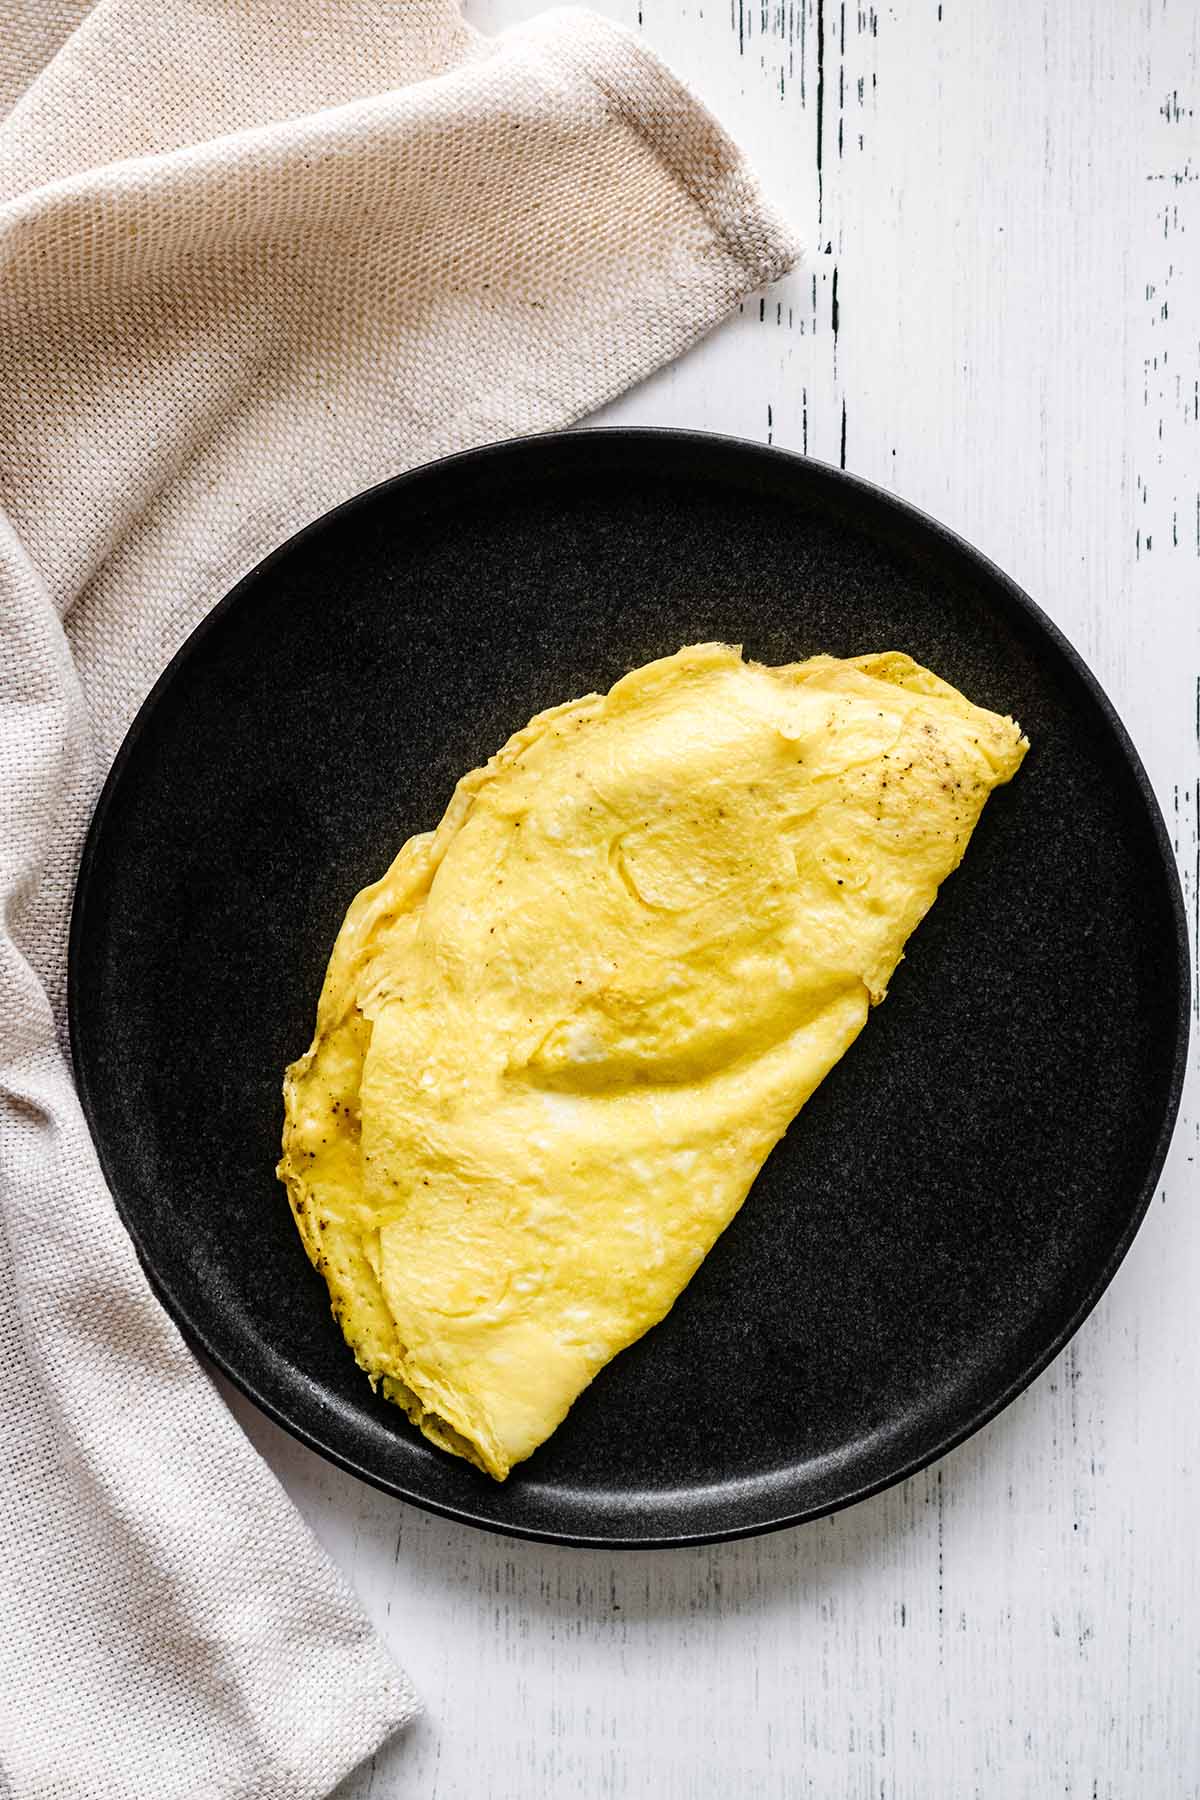 Whipped egg omelet on a dark grey plate with a beige napkin.